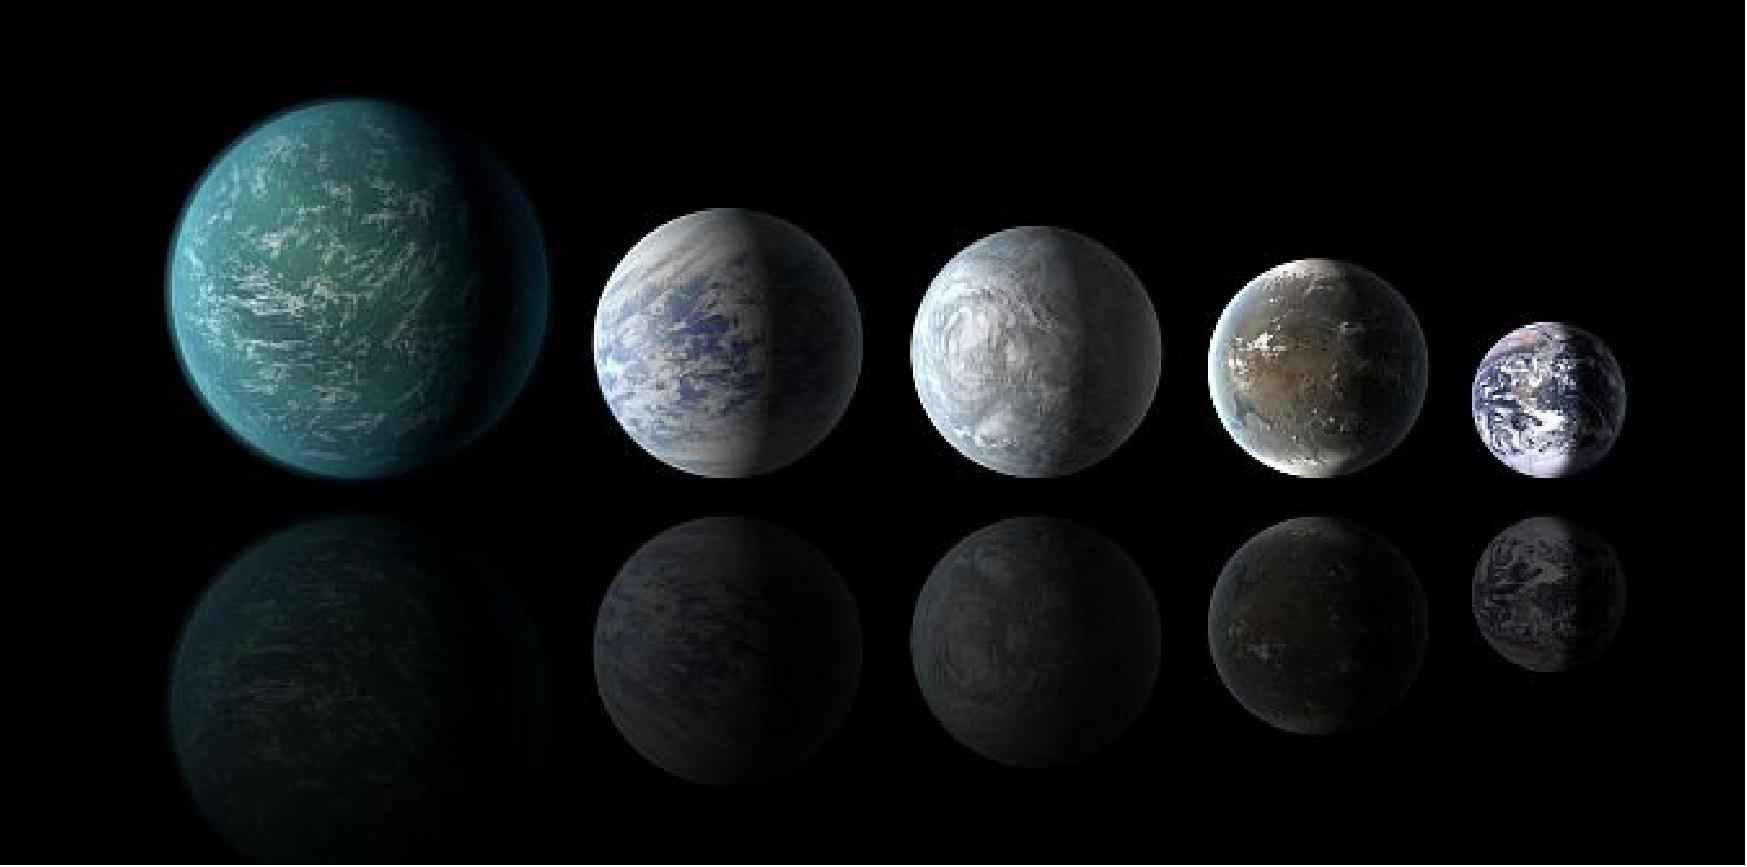 Figure 66: Relative sizes of all of the habitable-zone planets discovered to date alongside Earth. Left to right: Kepler-22b, Kepler-69c, Kepler-62e, Kepler-62f and Earth (except for Earth, these are artists' renditions), image credit: NASA Ames/JPL-Caltech